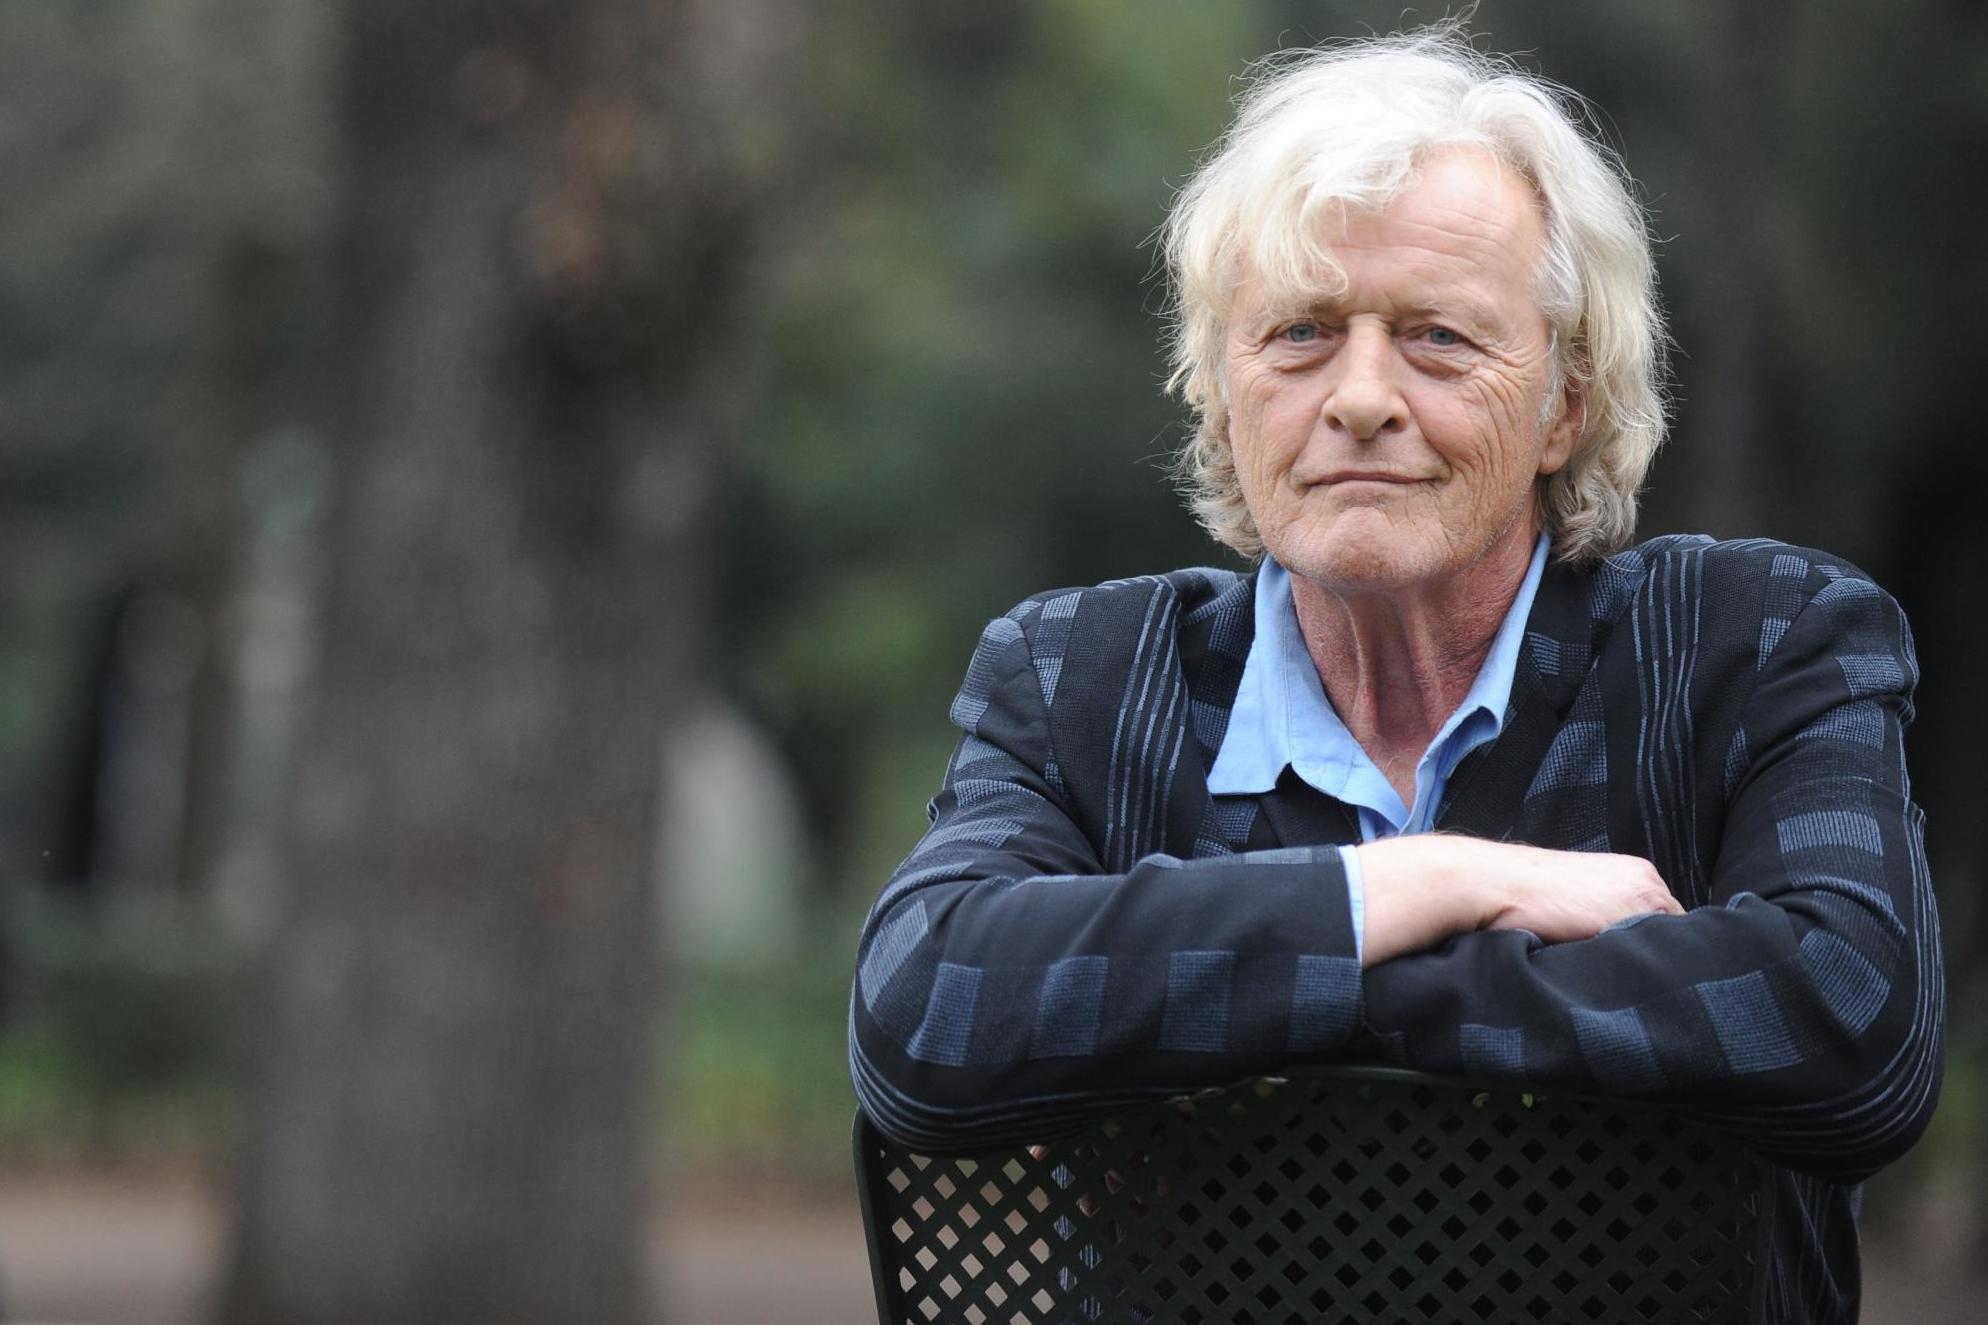 Rutger Hauer poses during a photocall on 23 January, 2014 in Rome.